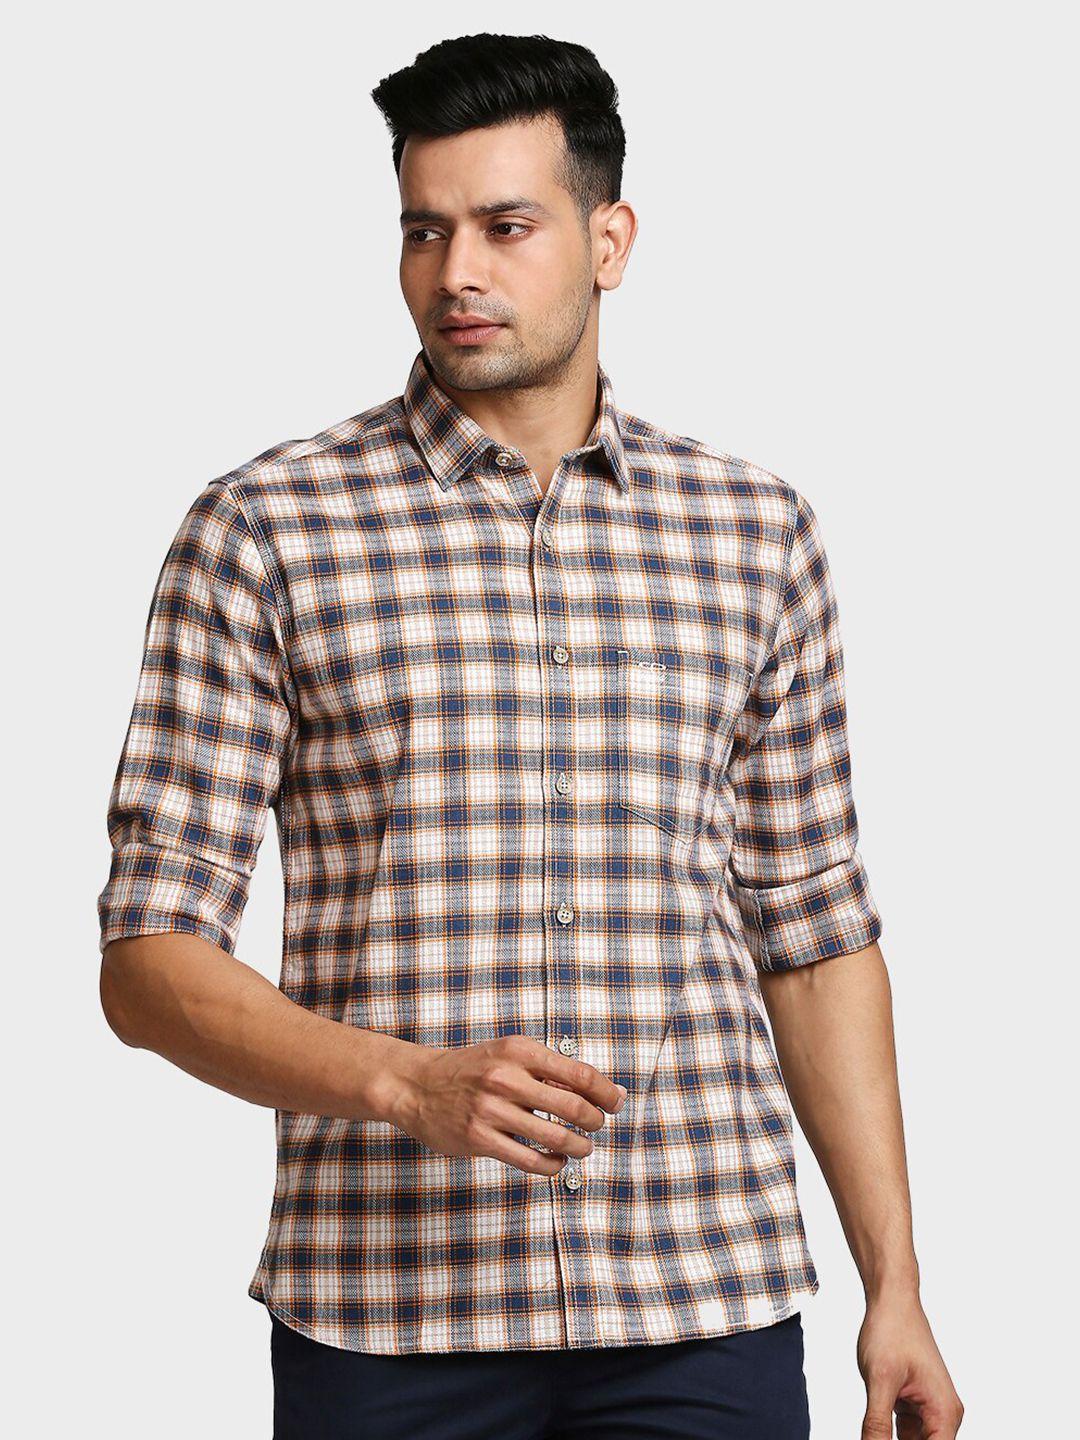 colorplus-men-orange-&-off-white-tailored-fit-checked-cotton-casual-shirt